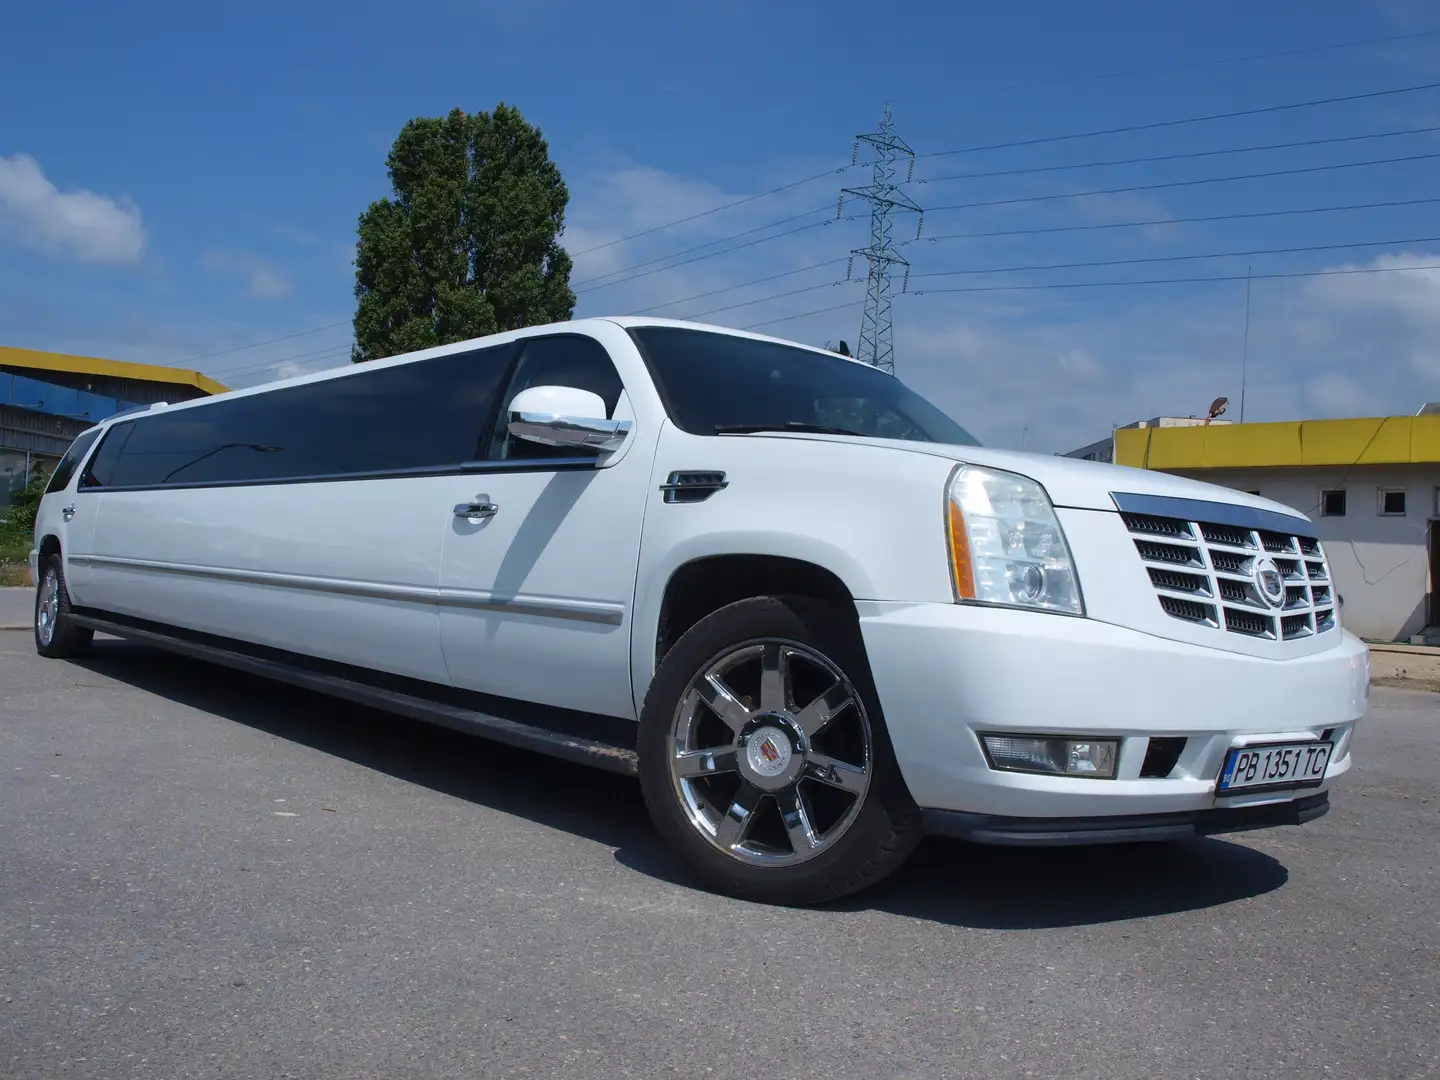 Cadillac Escalade 203-inch Stretch Limousine by Moonlight Industries White - 1